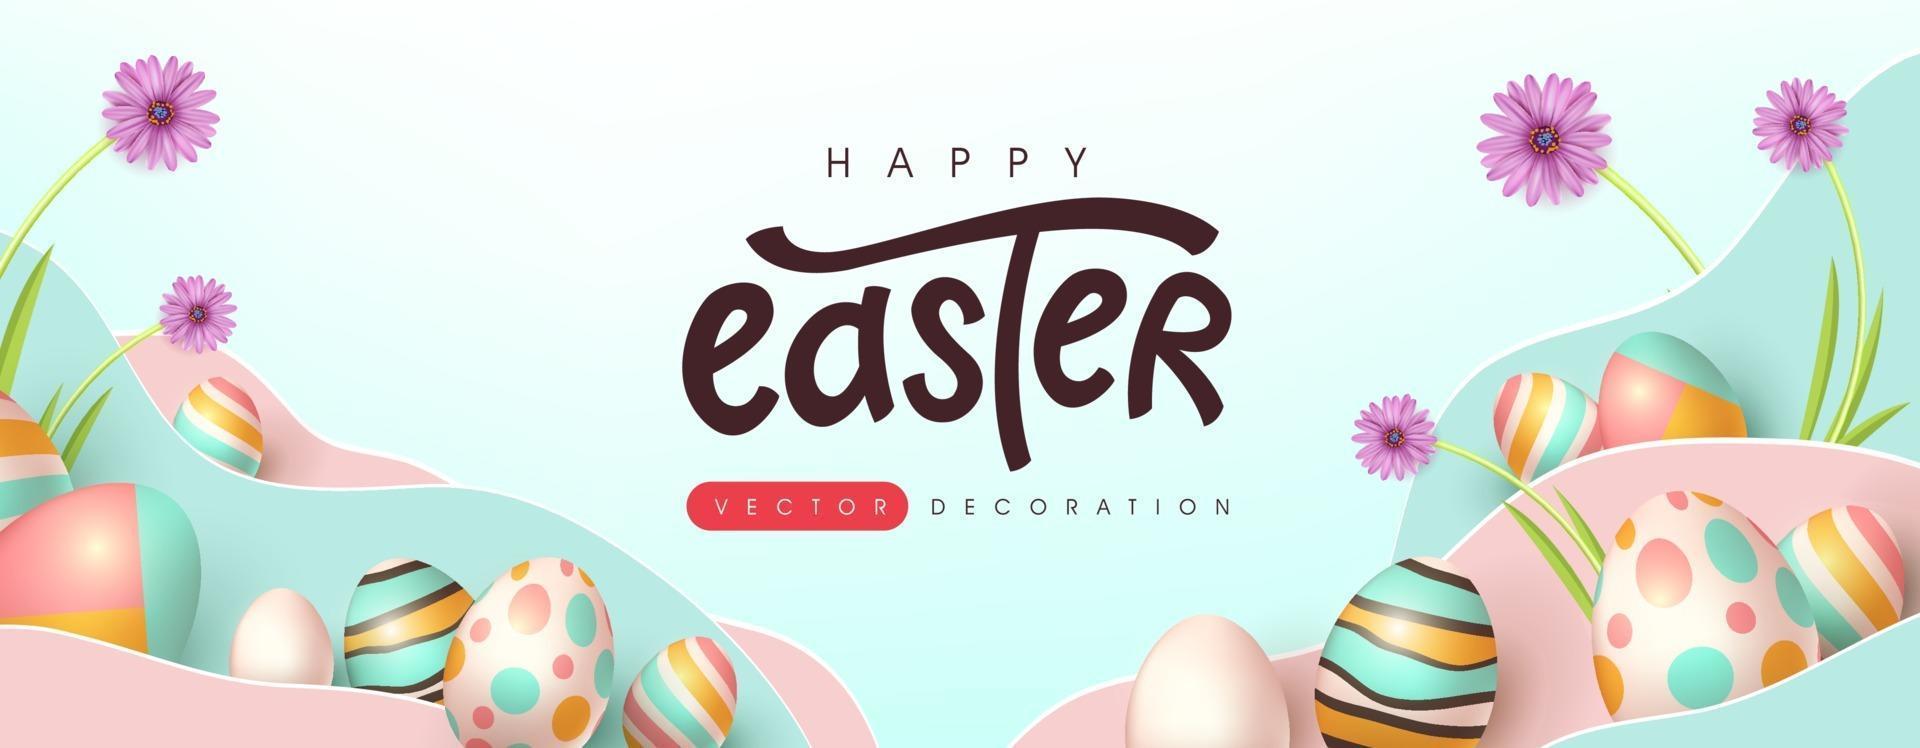 Easter banner background template with colorful eggs vector